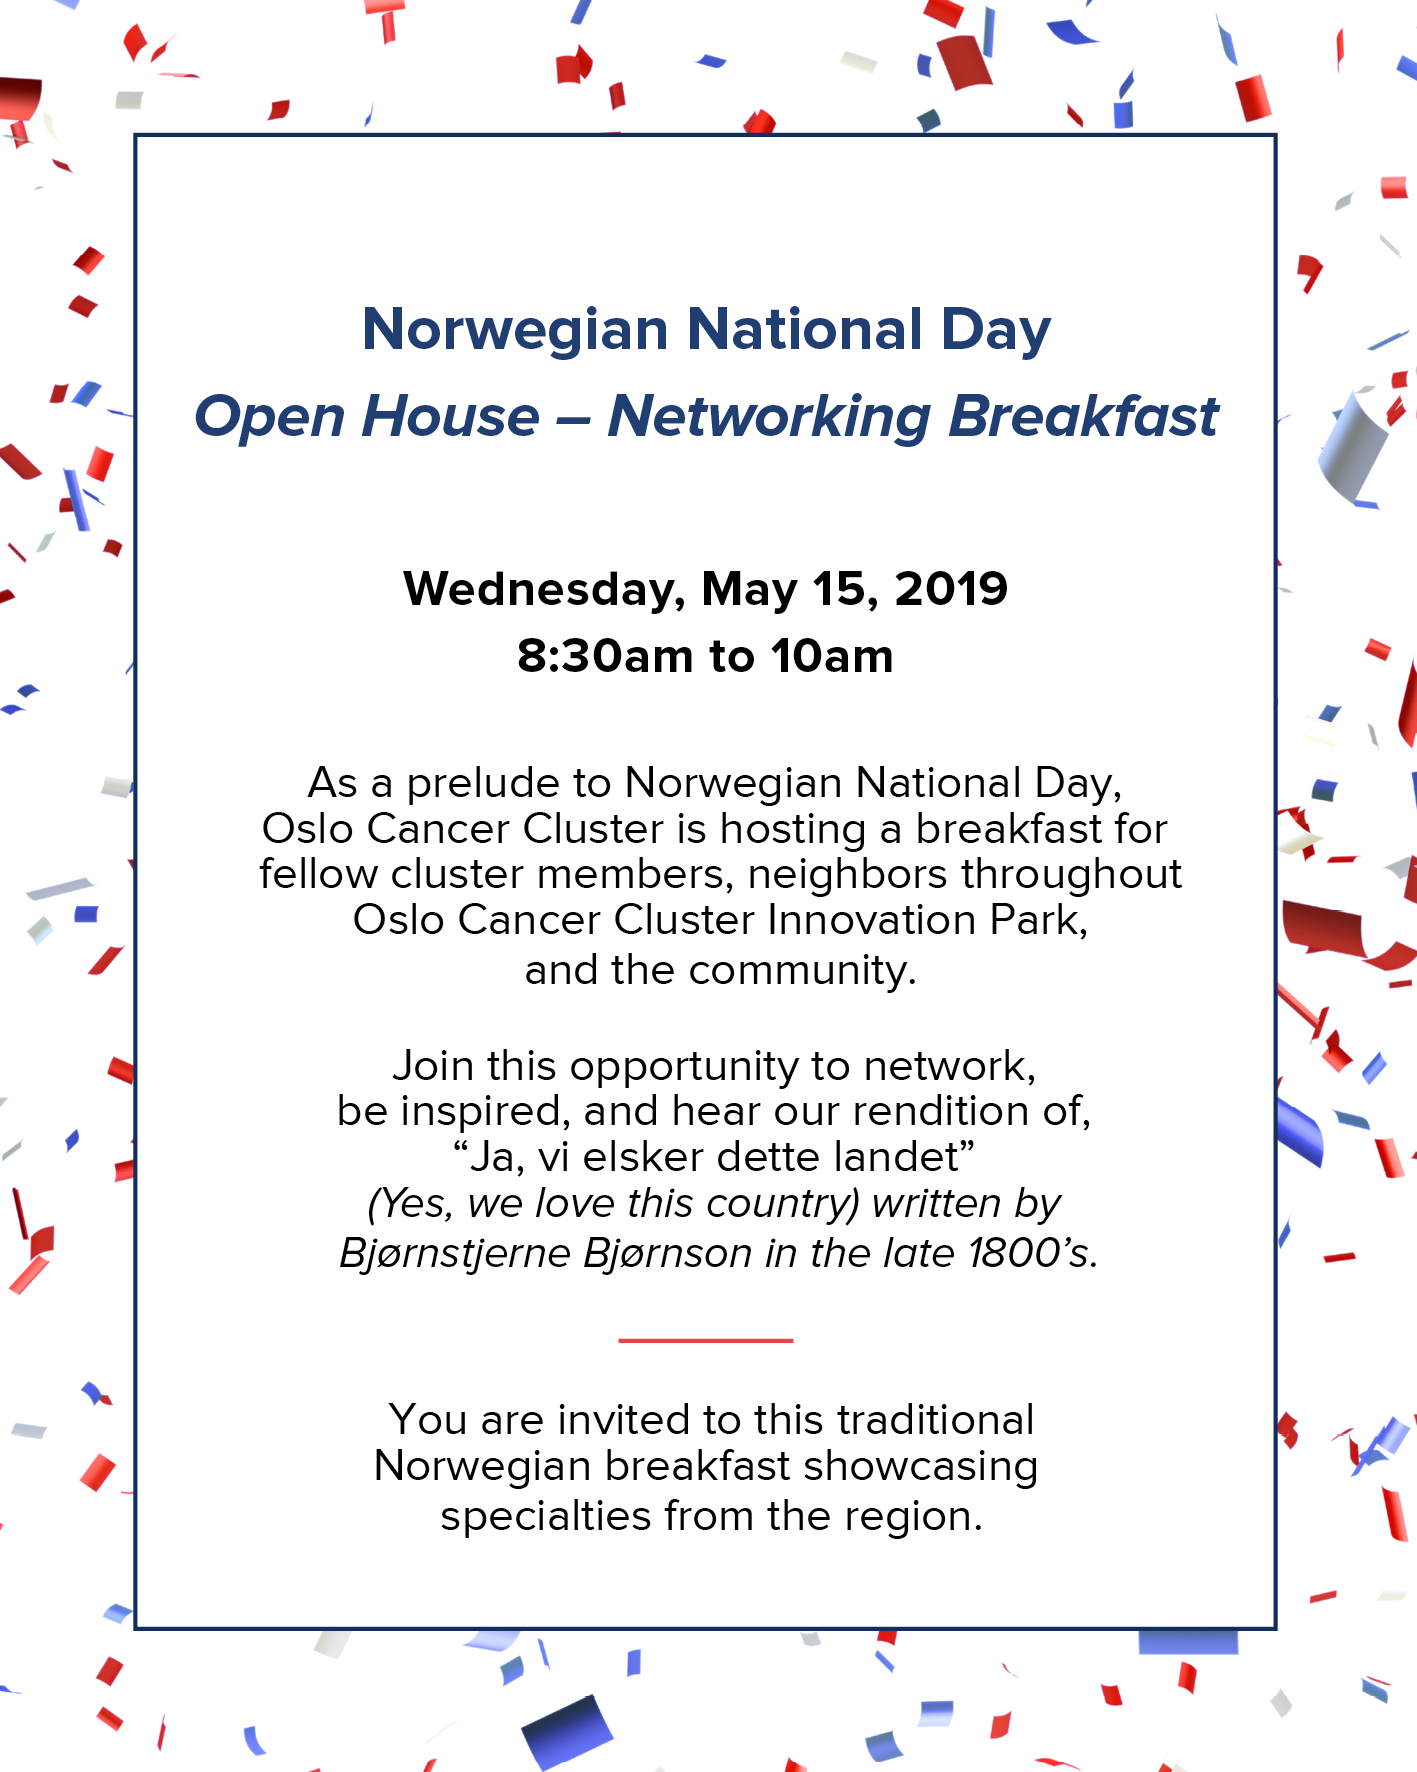 Invitation to Norwegian National Day Open House Networking Breakfast